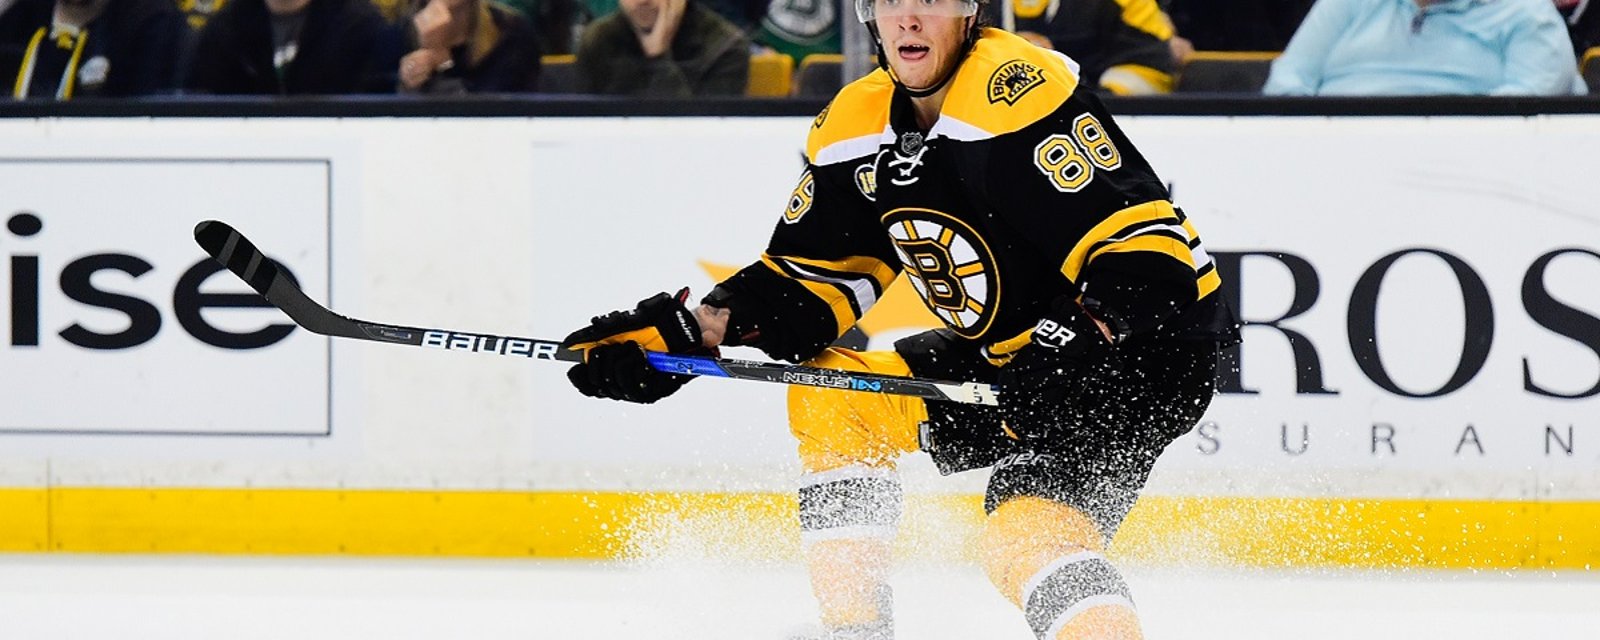 Breaking: David Pastrnak FINALLY signs with the Bruins